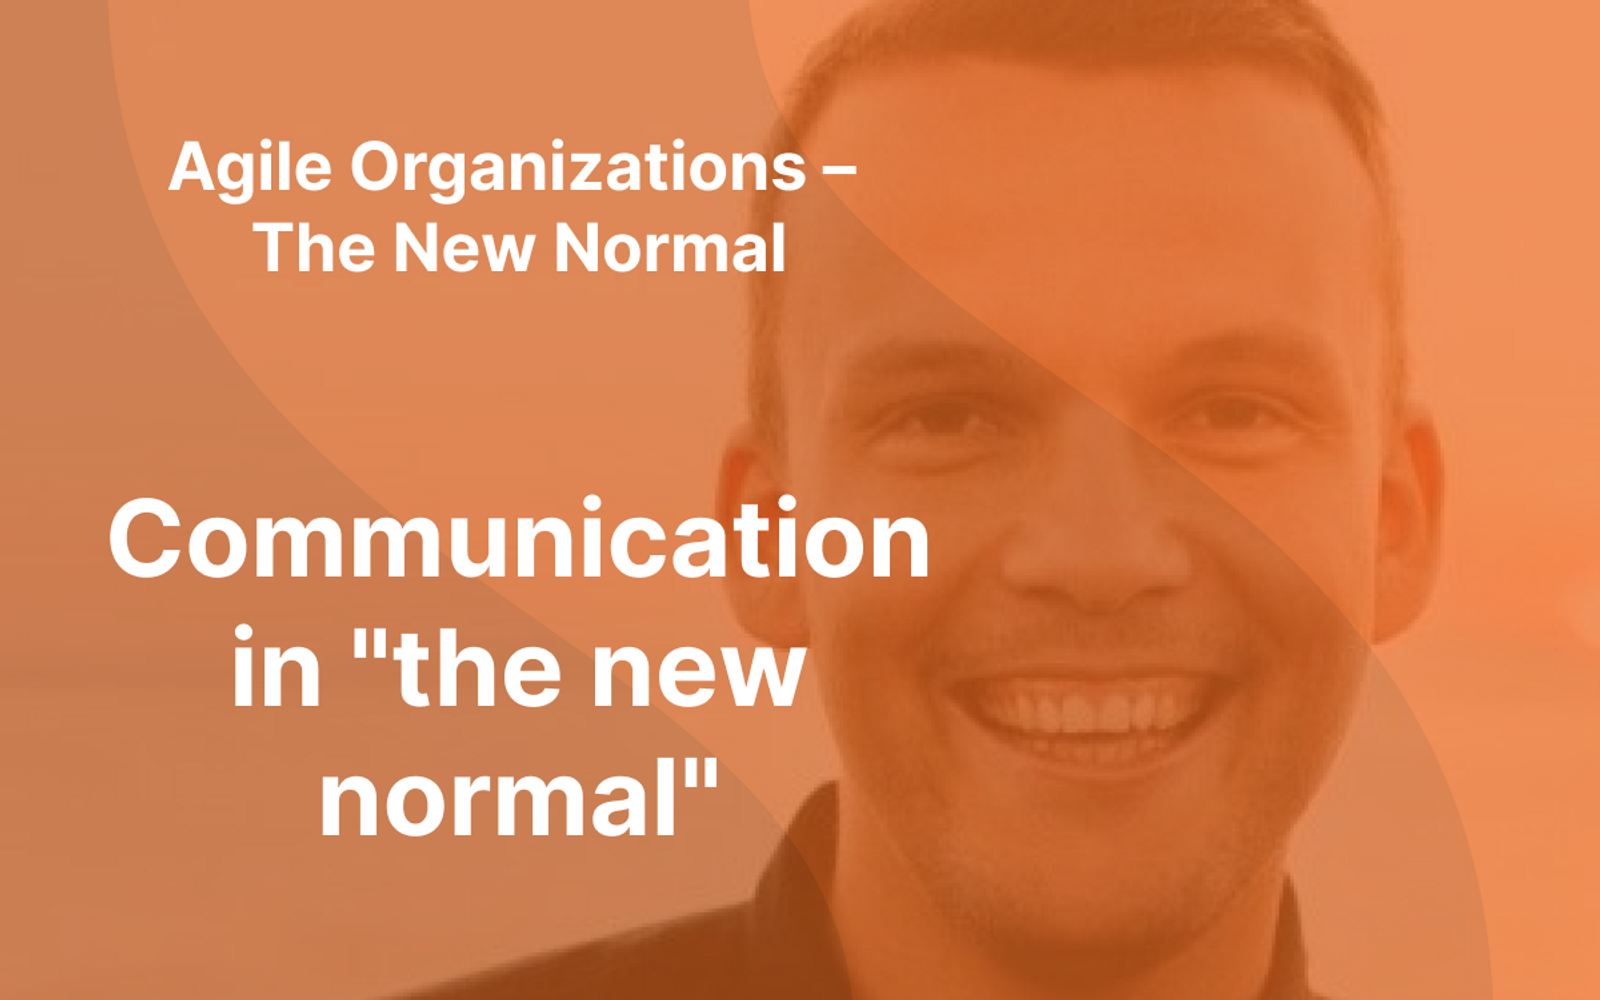 Picture of Sindre Suphellen with orange overlay and the text "Agile Organizations - The New Normal" and "Communication in the new normal" written in white